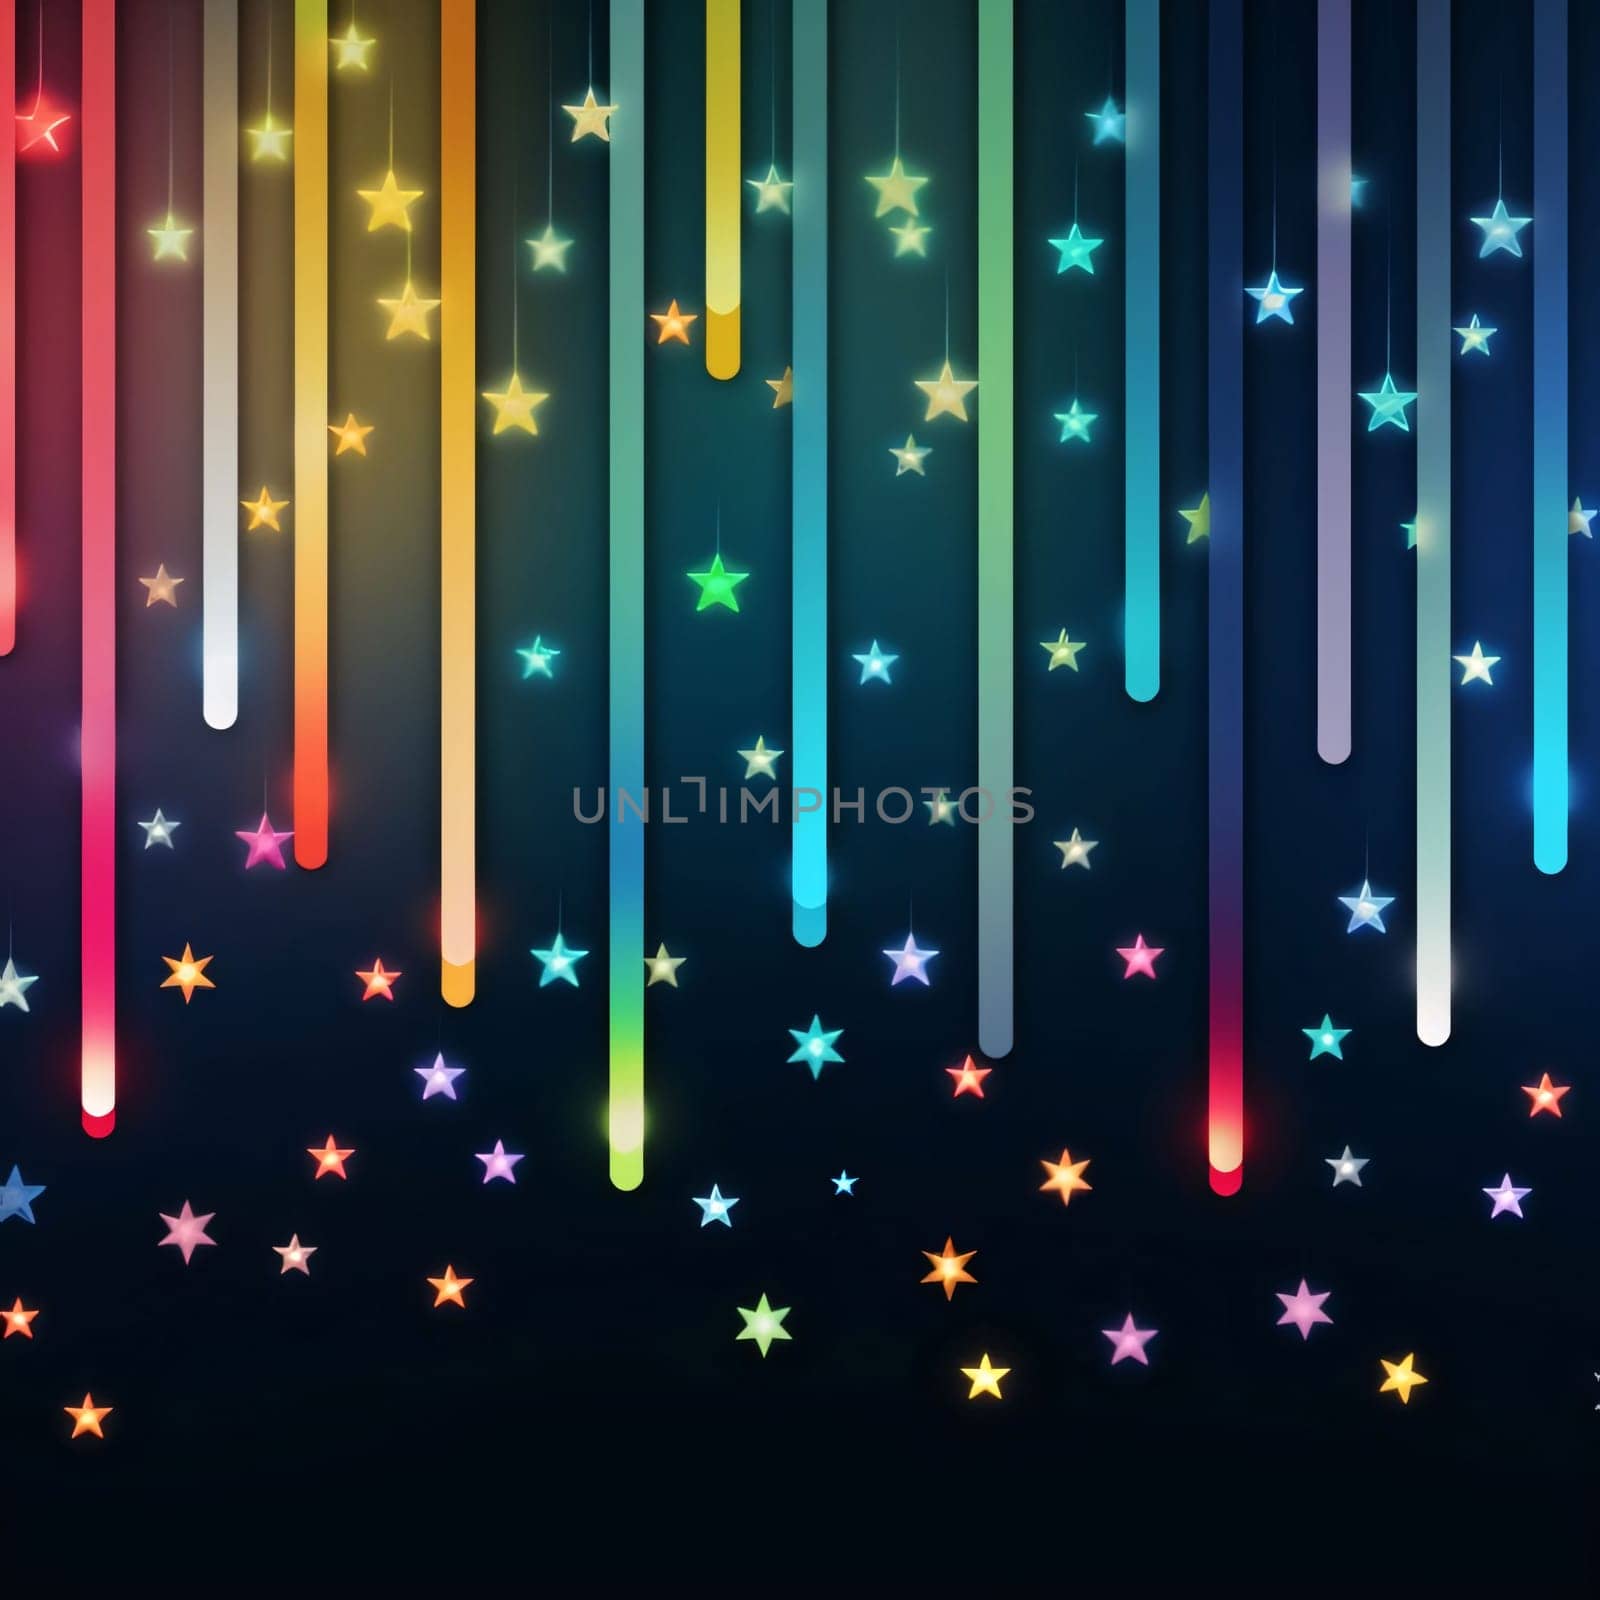 Abstract background design: Abstract background with multicolored stripes and stars. Vector illustration.